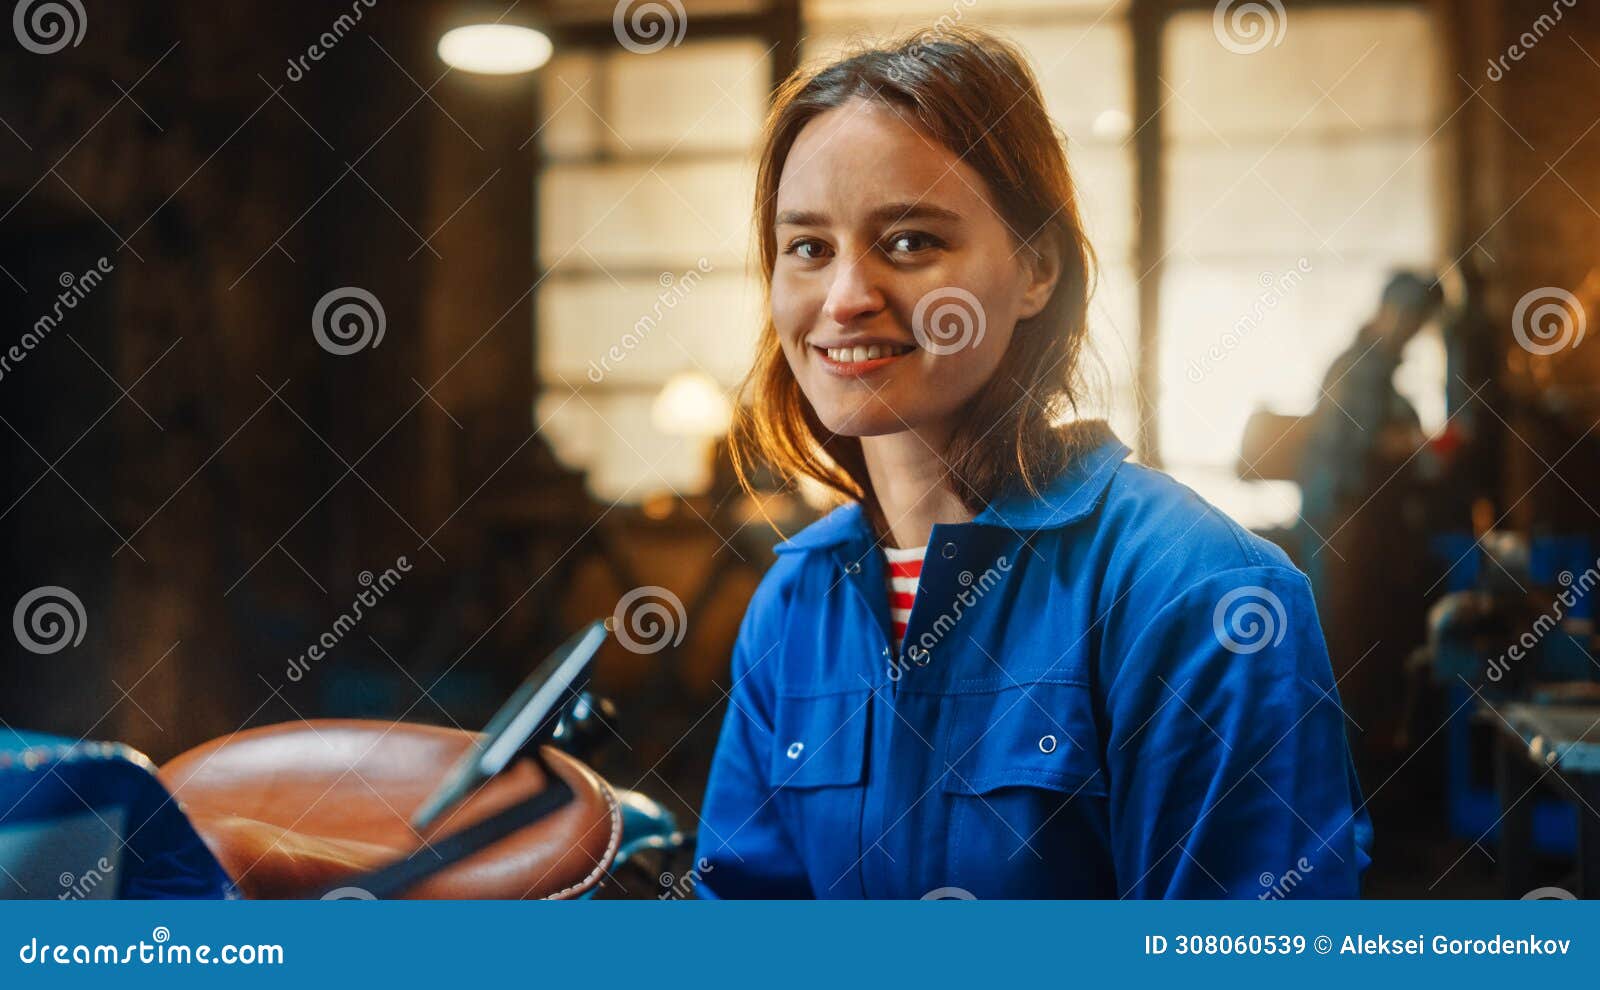 young beautiful empowering woman gently smiles at the camera. authentic fabricator wearing work cl